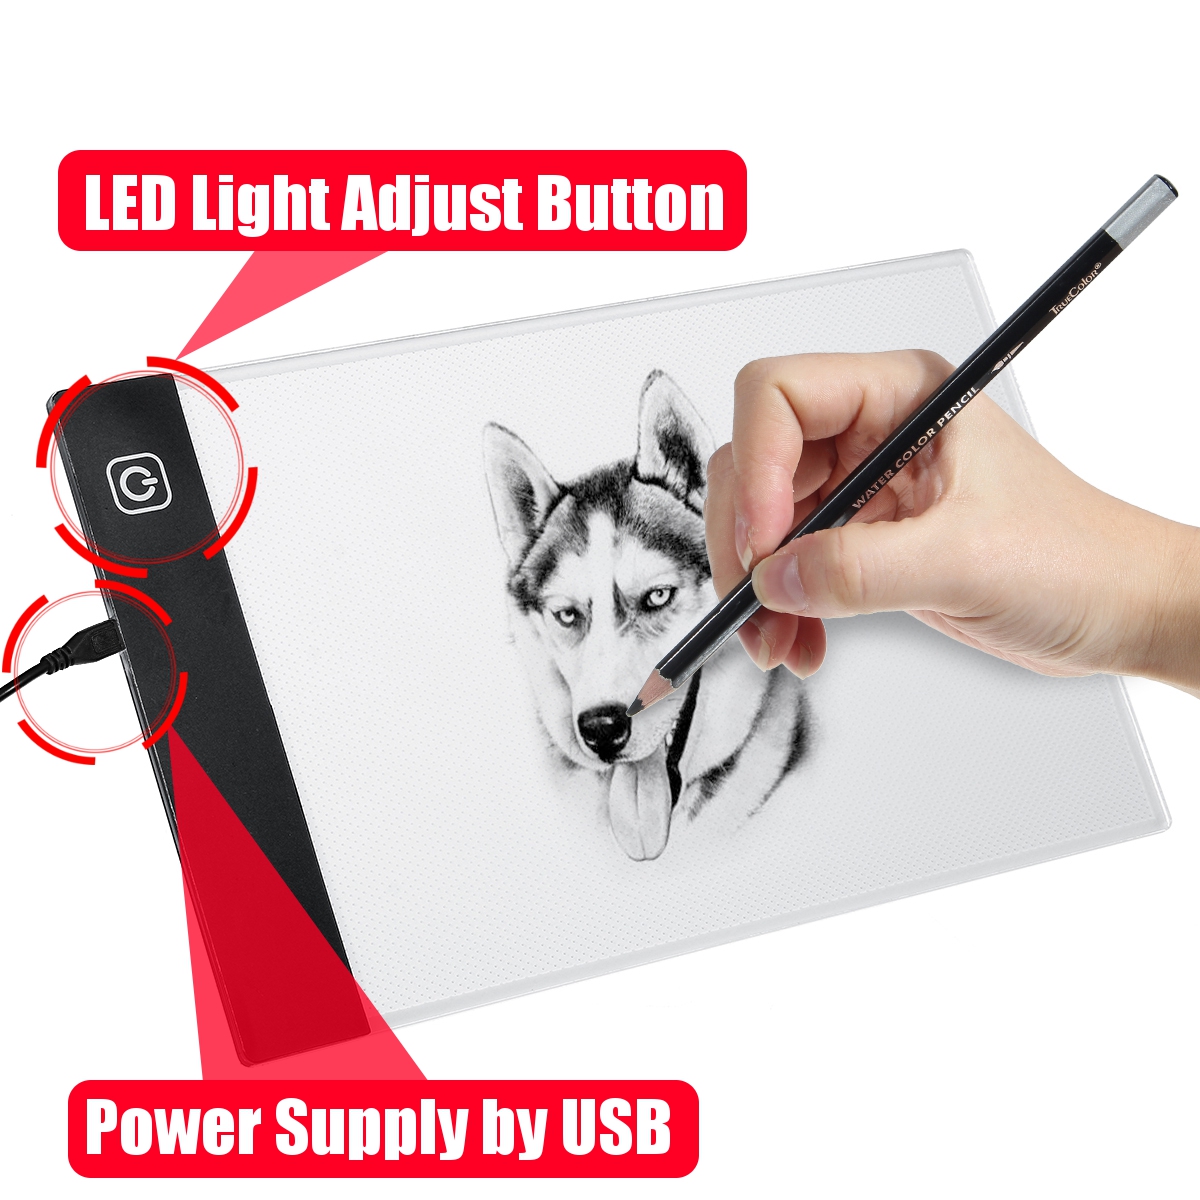 A5-LED-Art-Craft-Drawing-Copy-Tracing-Tattoo-LED-Light-Box-Board-Pad-Thin-with-USB-Cable-Paintings-G-1631400-8